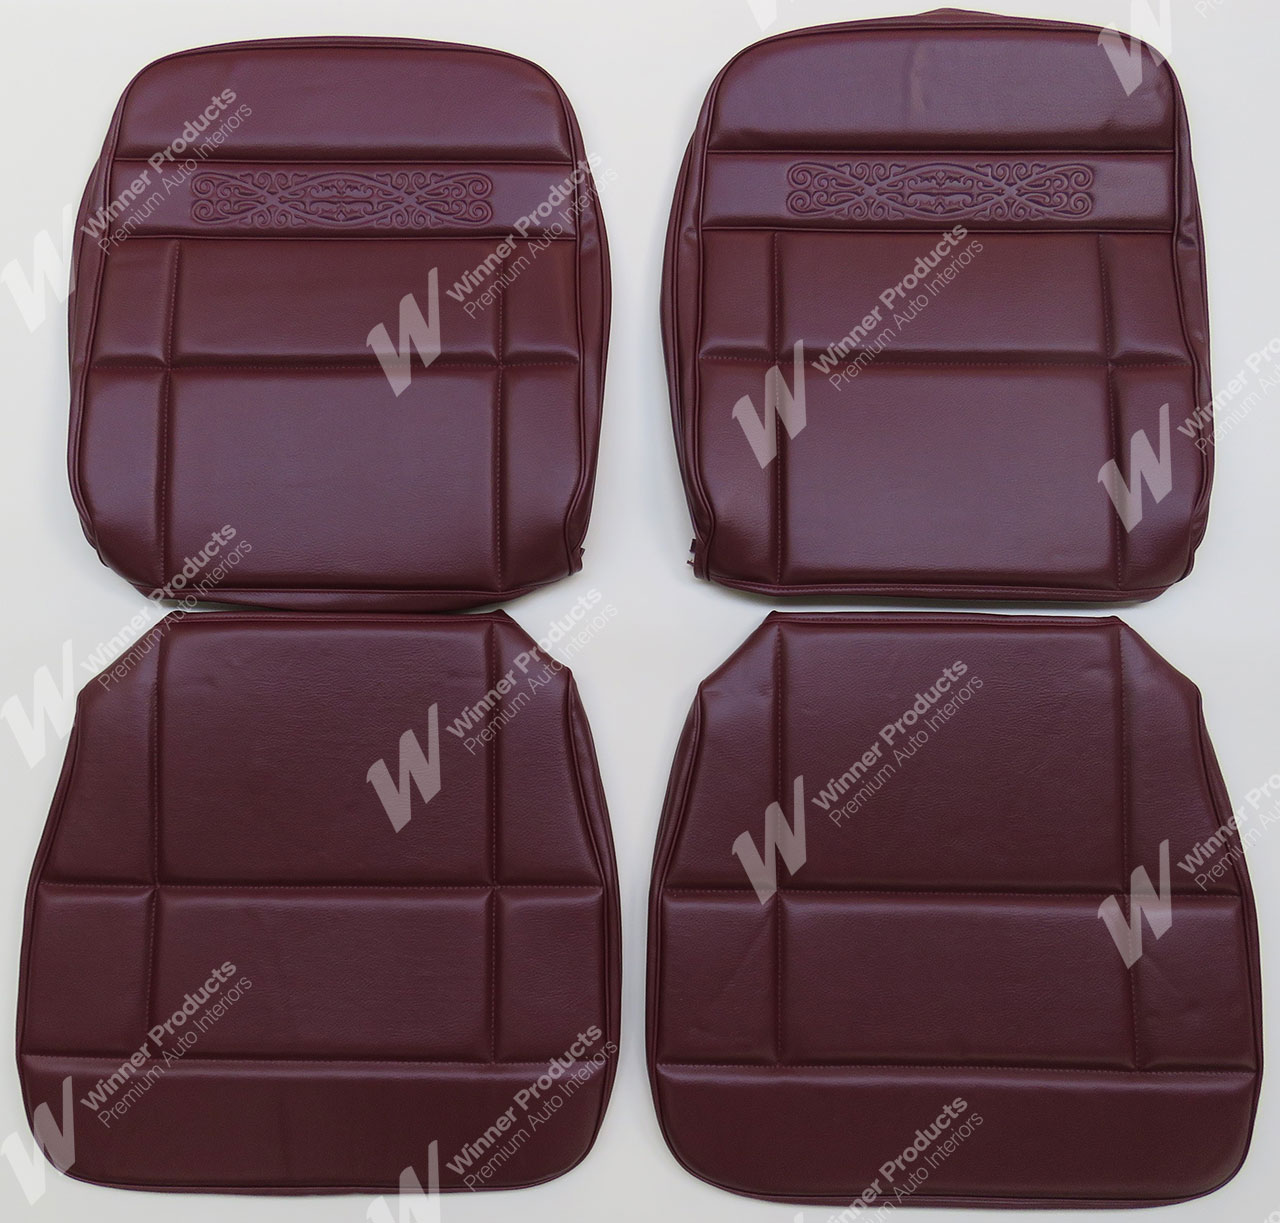 Holden Premier HT Premier Wagon 12R Morocco Red Seat Covers (Image 1 of 4)